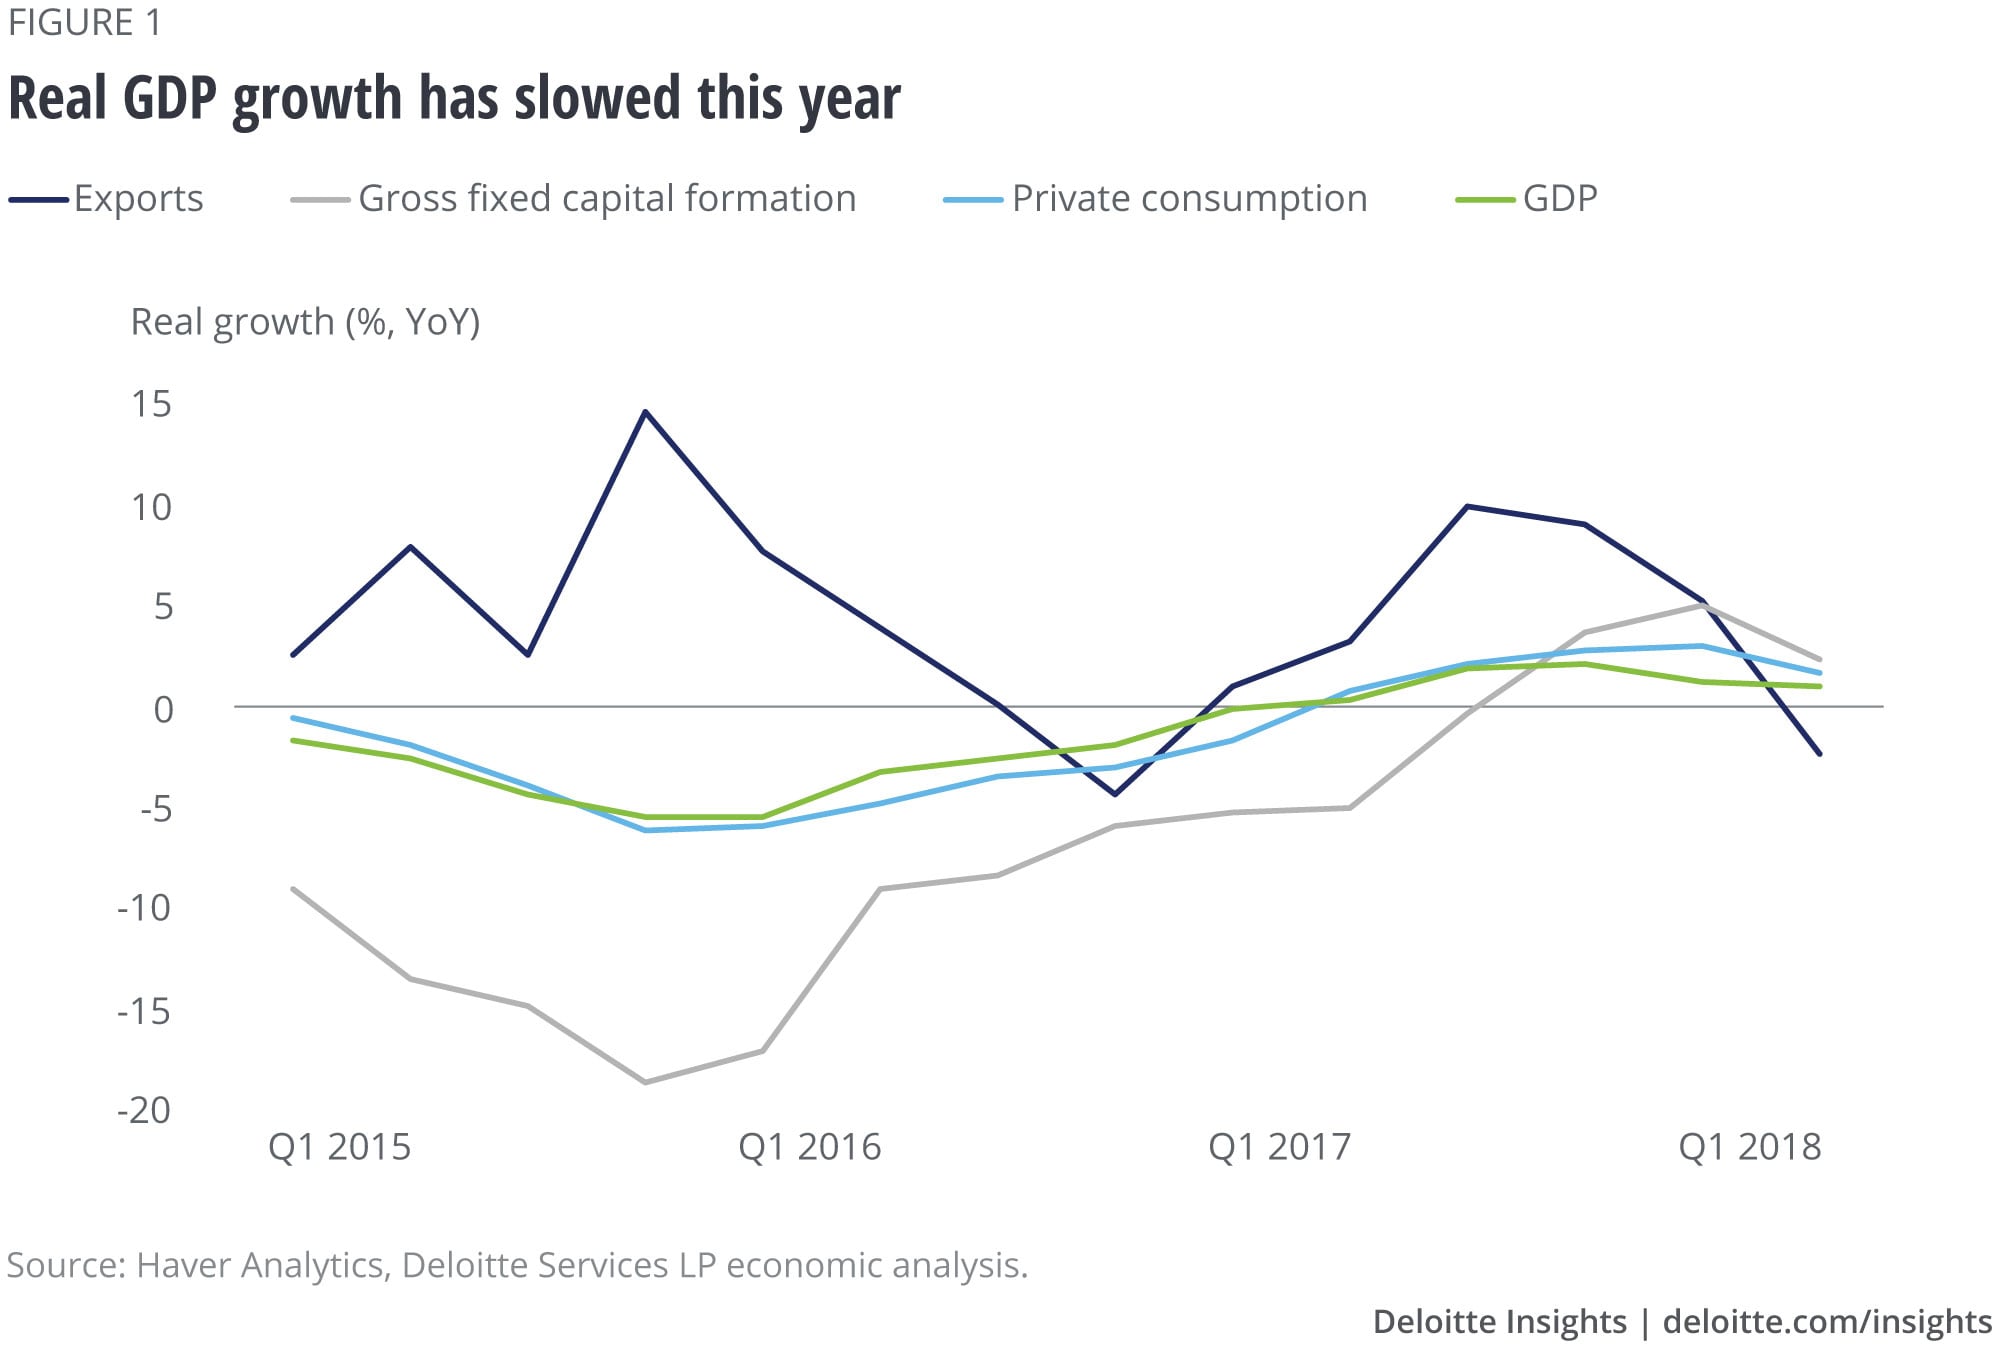 Real GDP growth has slowed this year